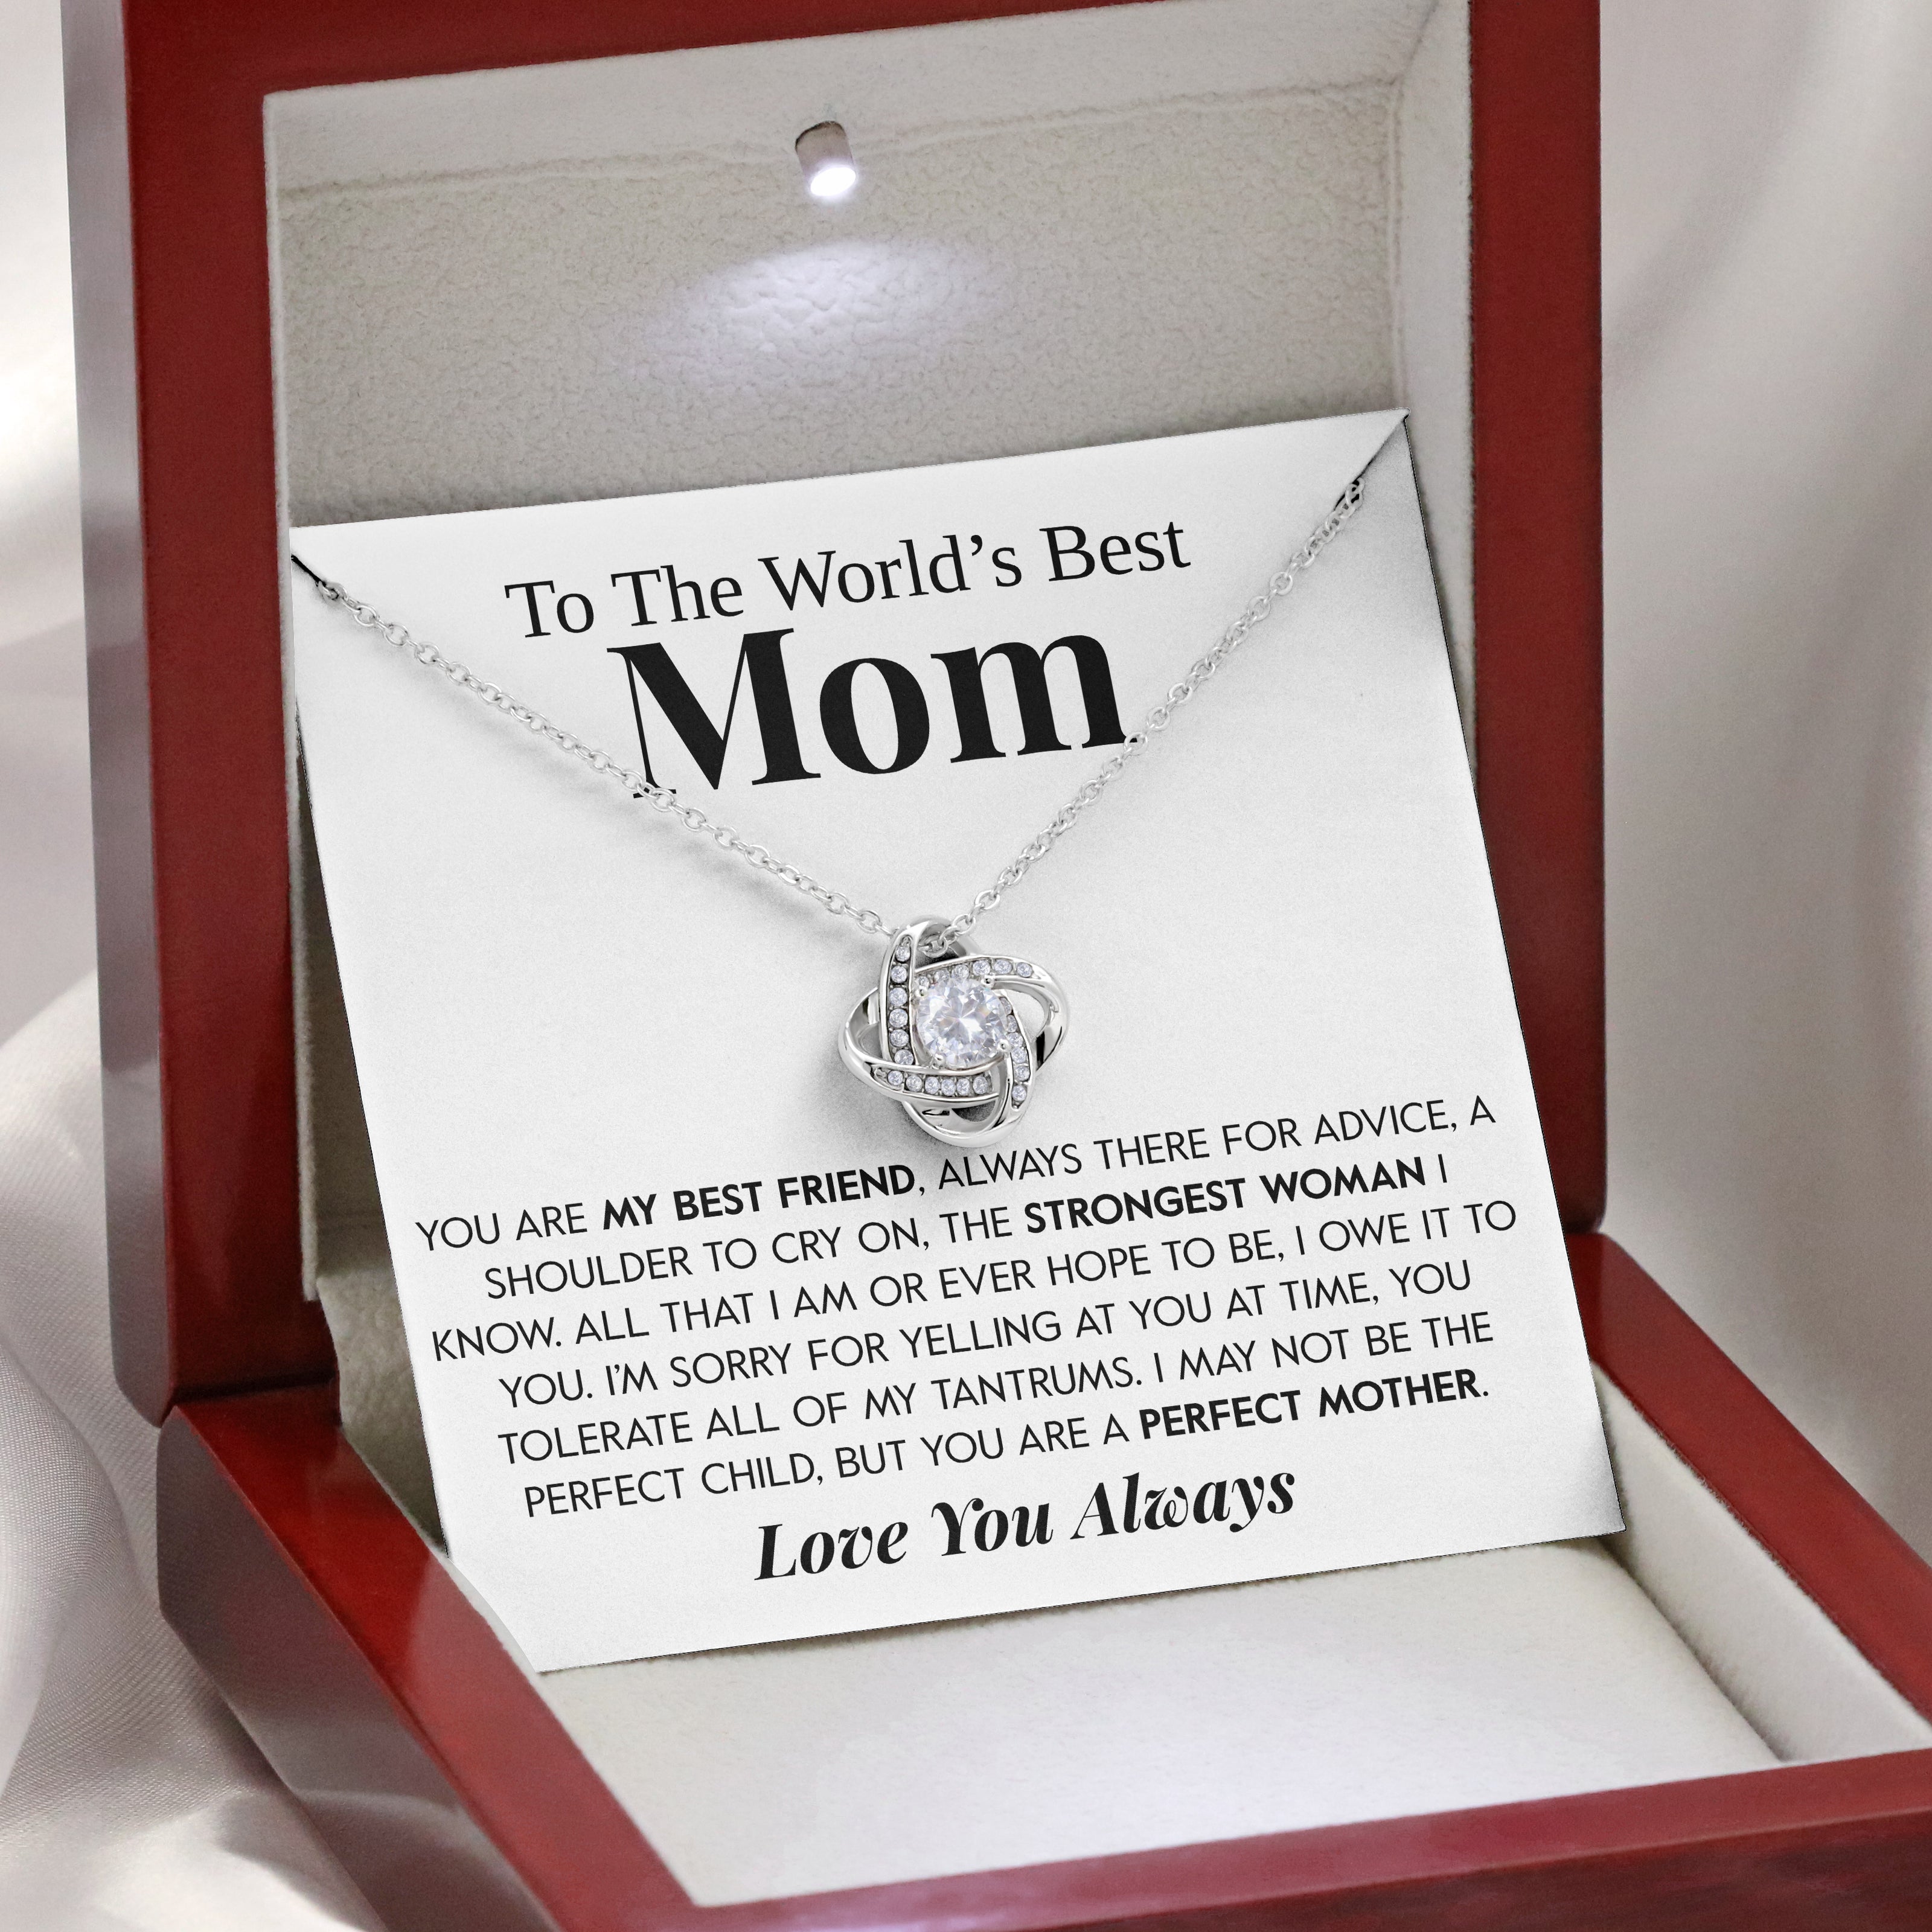 To The World's Best Mom | "My Best Friend" | Love Knot Necklace